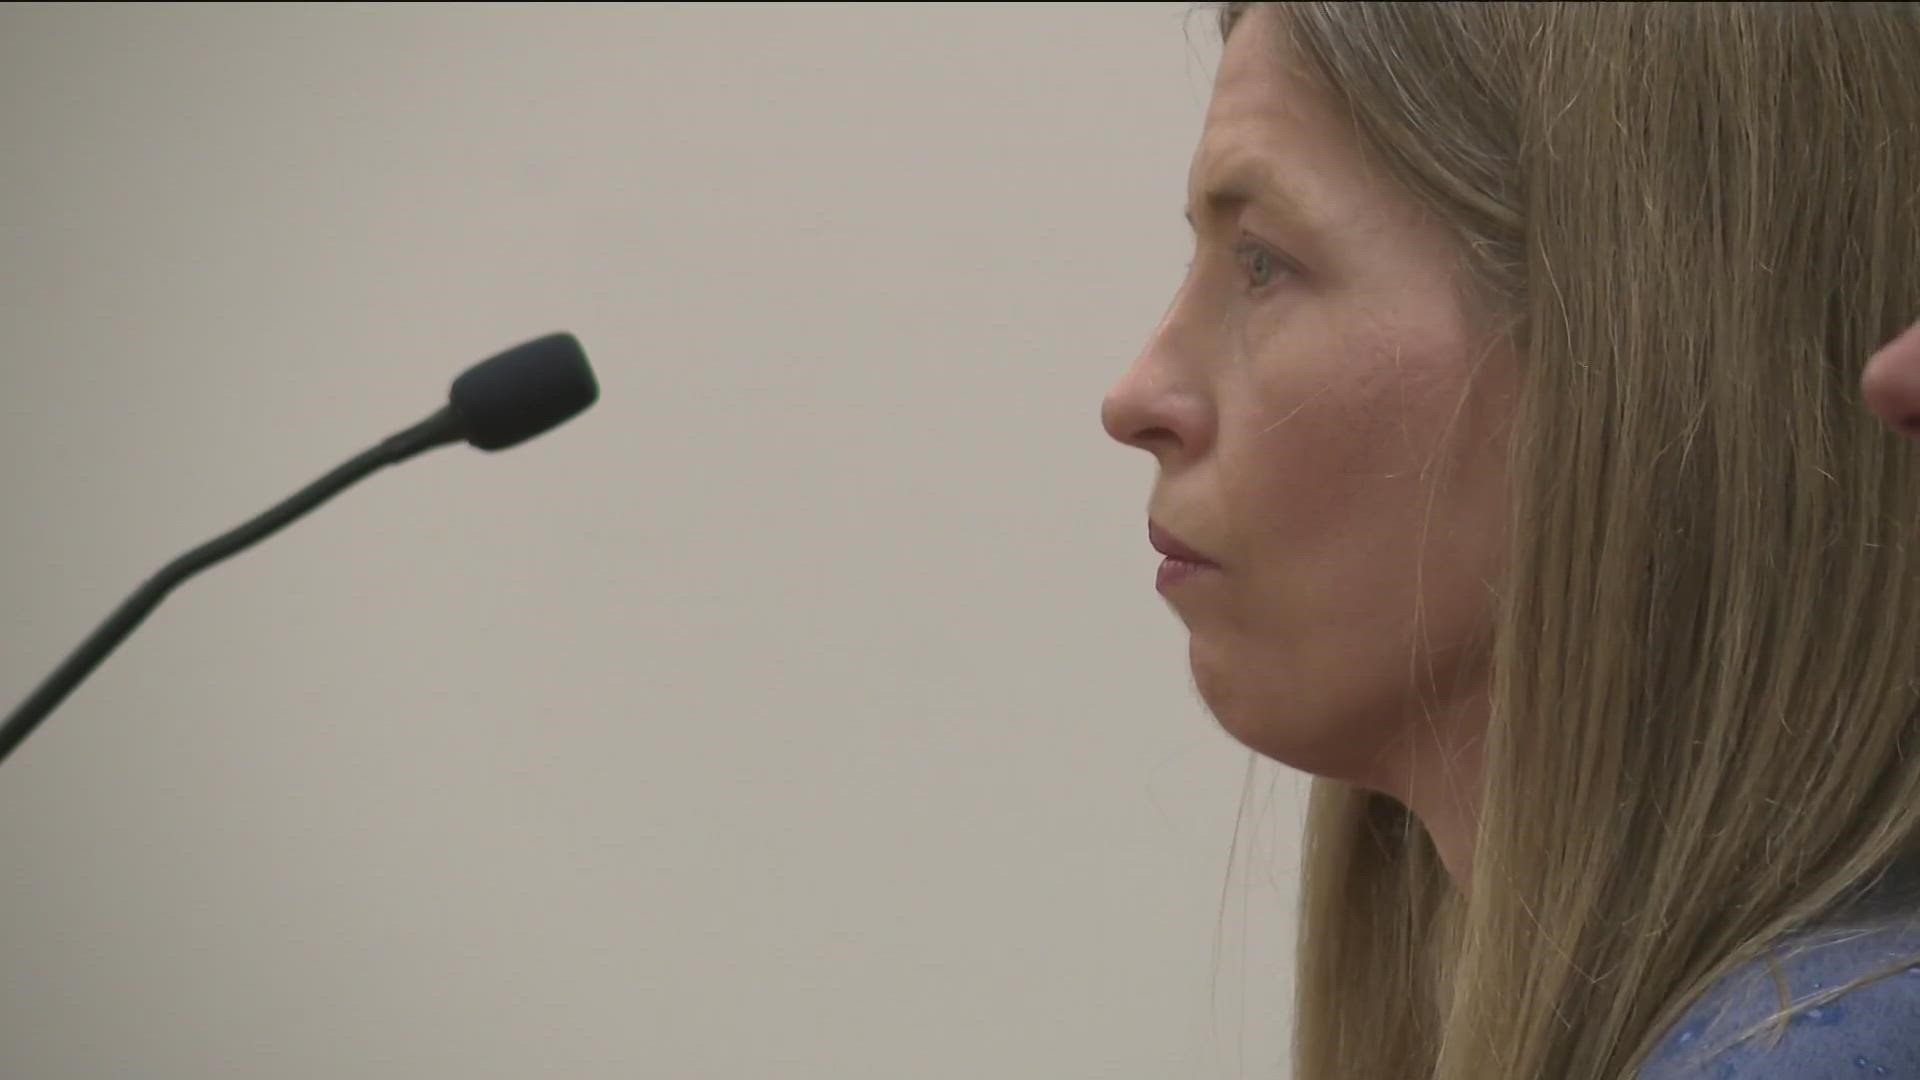 Kerry Black pled not guilty to 11 counts of injury to a child in court Friday. She was arrested at her home on Feb. 17, but is currently out of jail on bond.